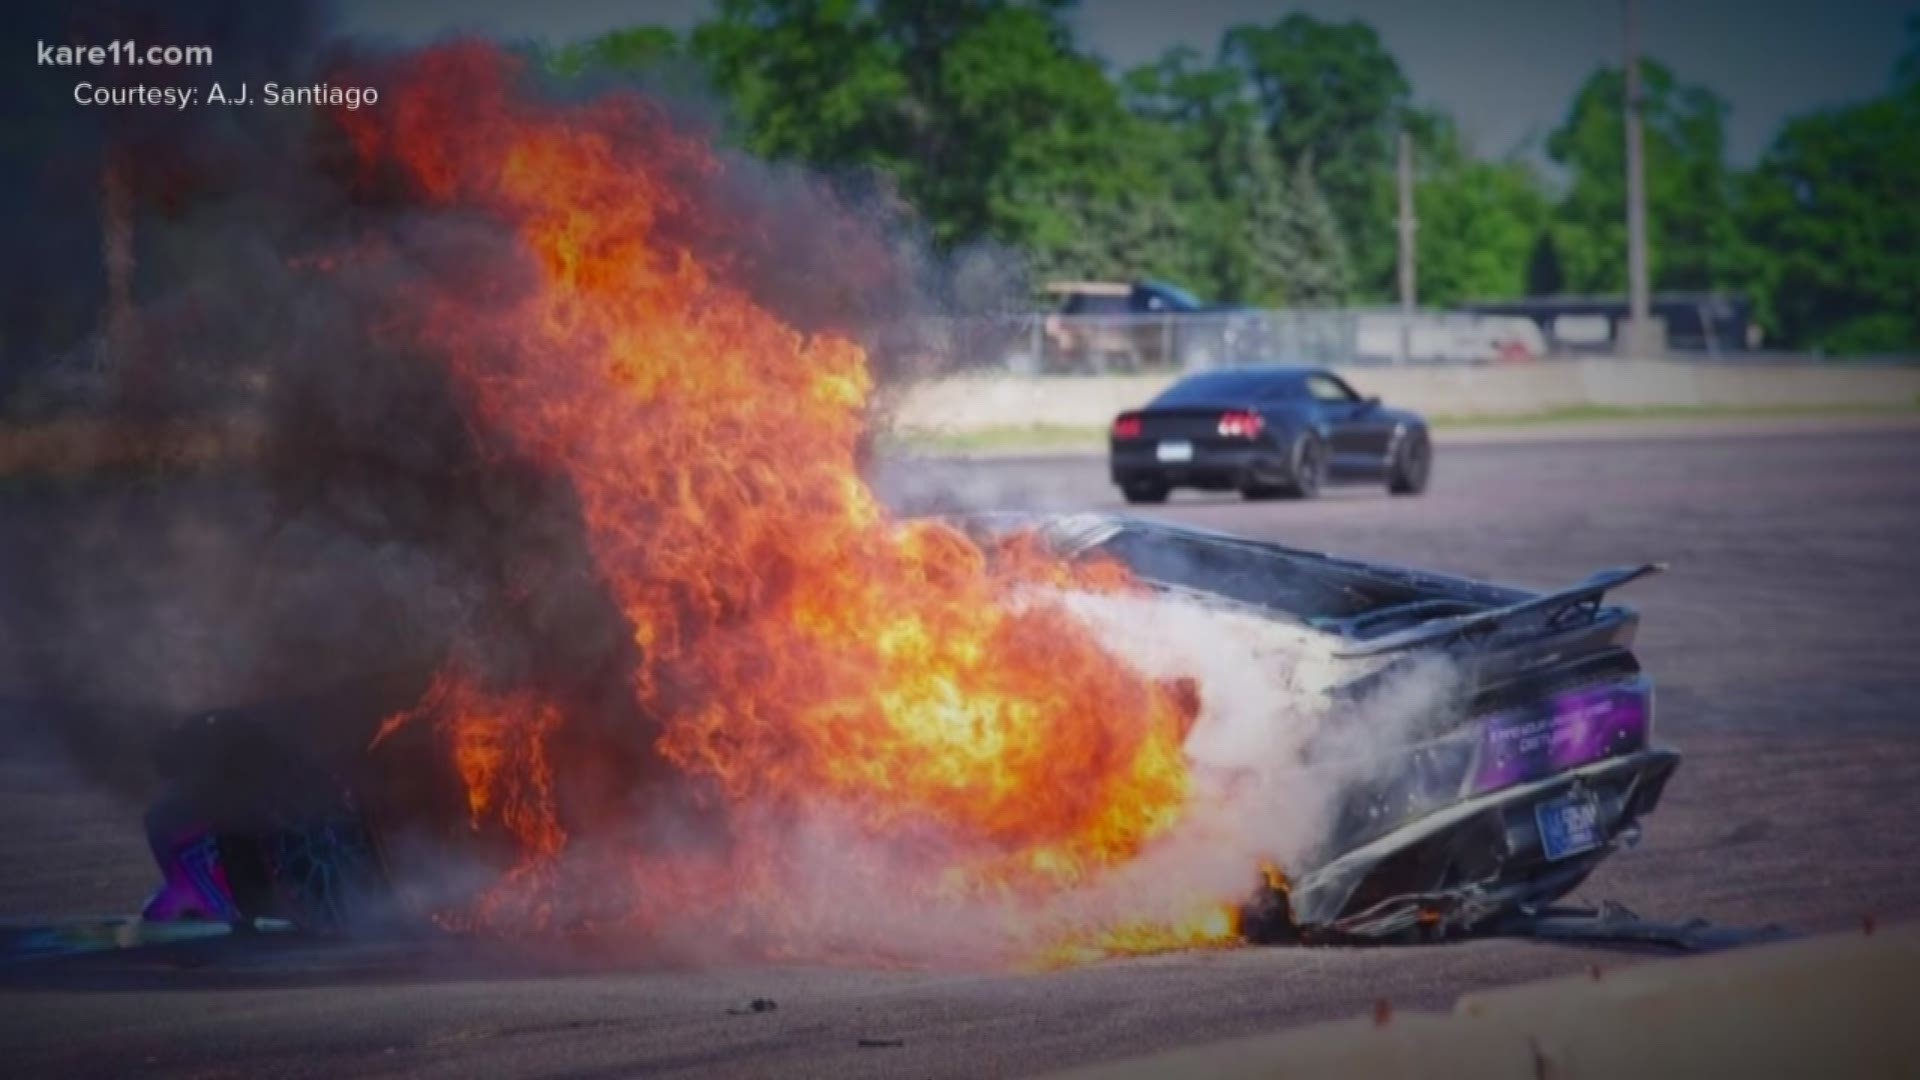 With an unbreakable bond, two friends survived a fiery crash at Brainerd International Raceway this past weekend.